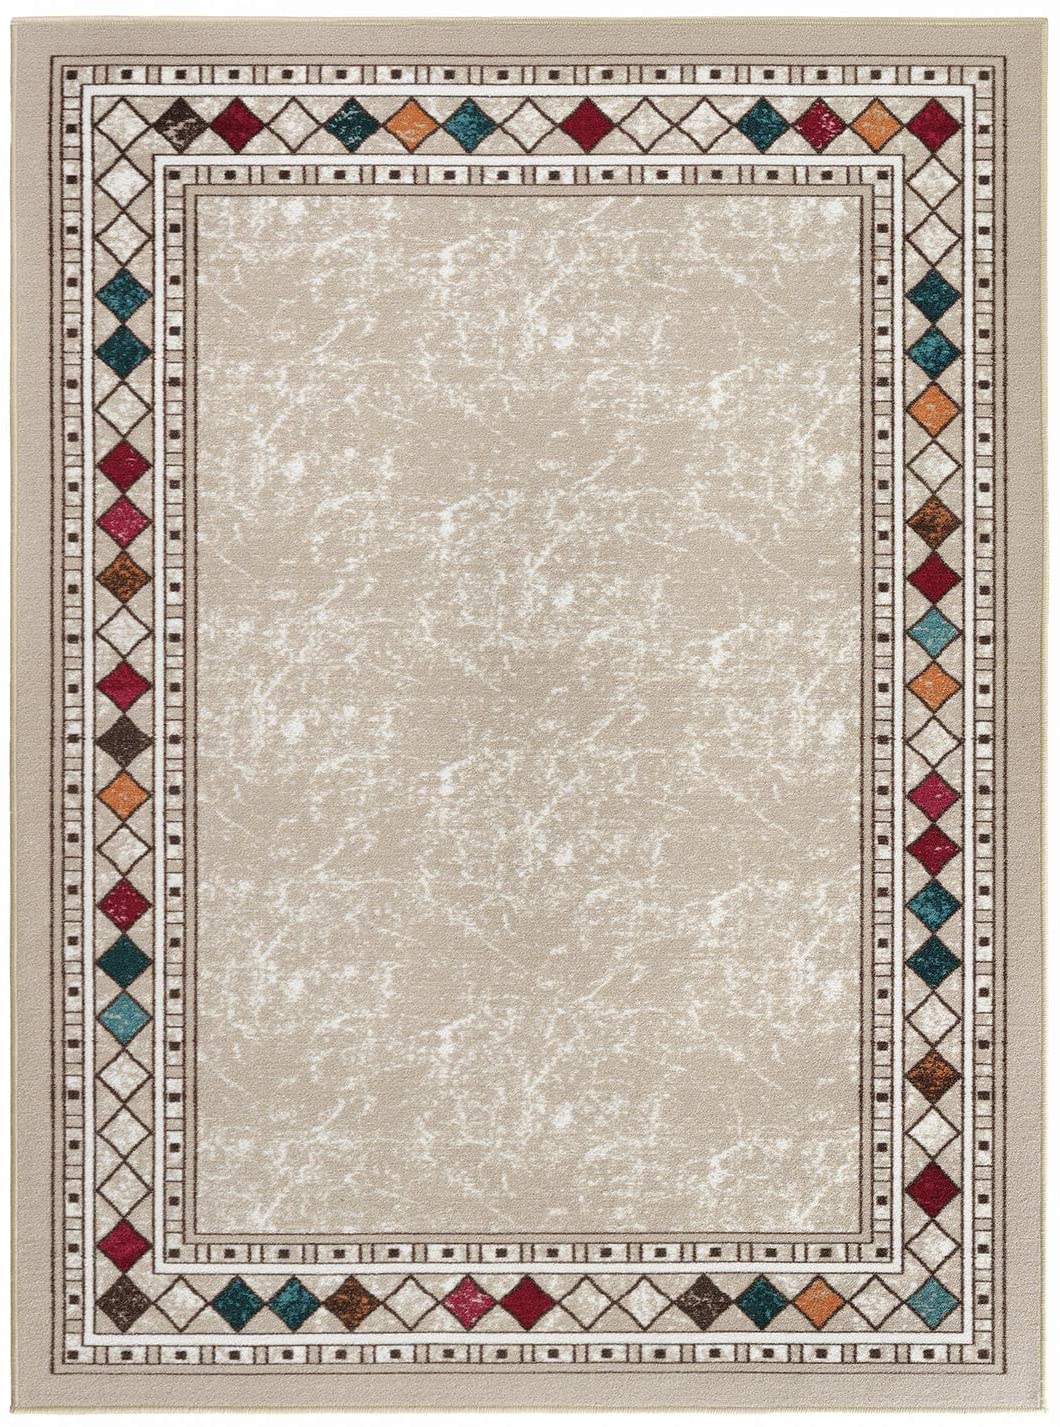 Bordered Non-Skid Low Profile Pile Rubber Backing Kitchen Area Rugs Beige